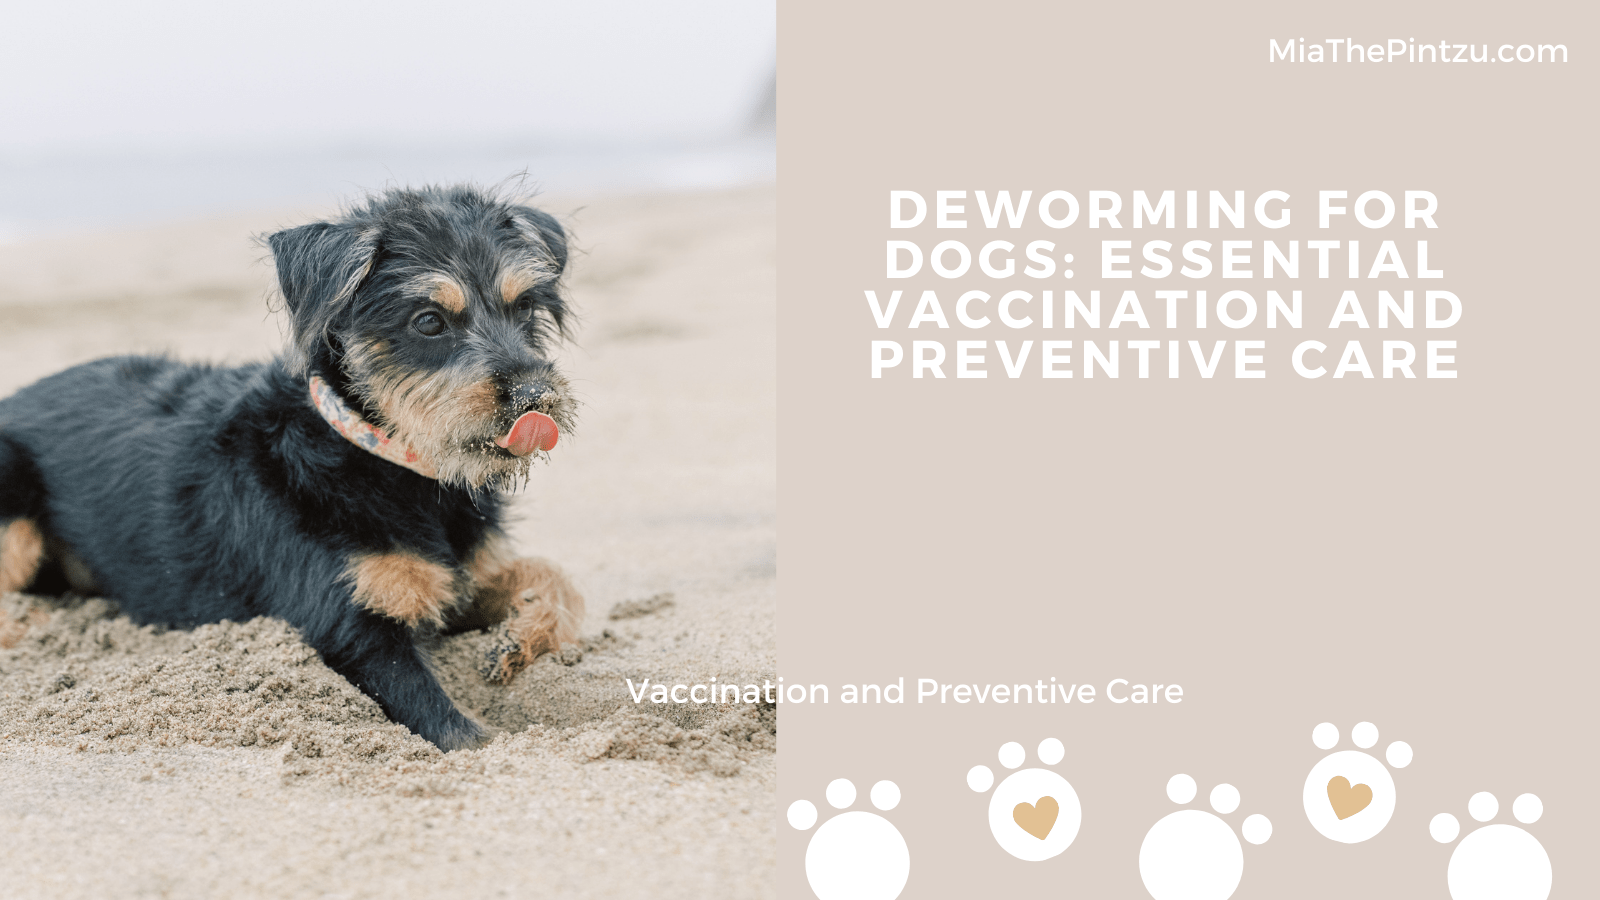 Deworming for Dogs: Essential Vaccination and Preventive Care